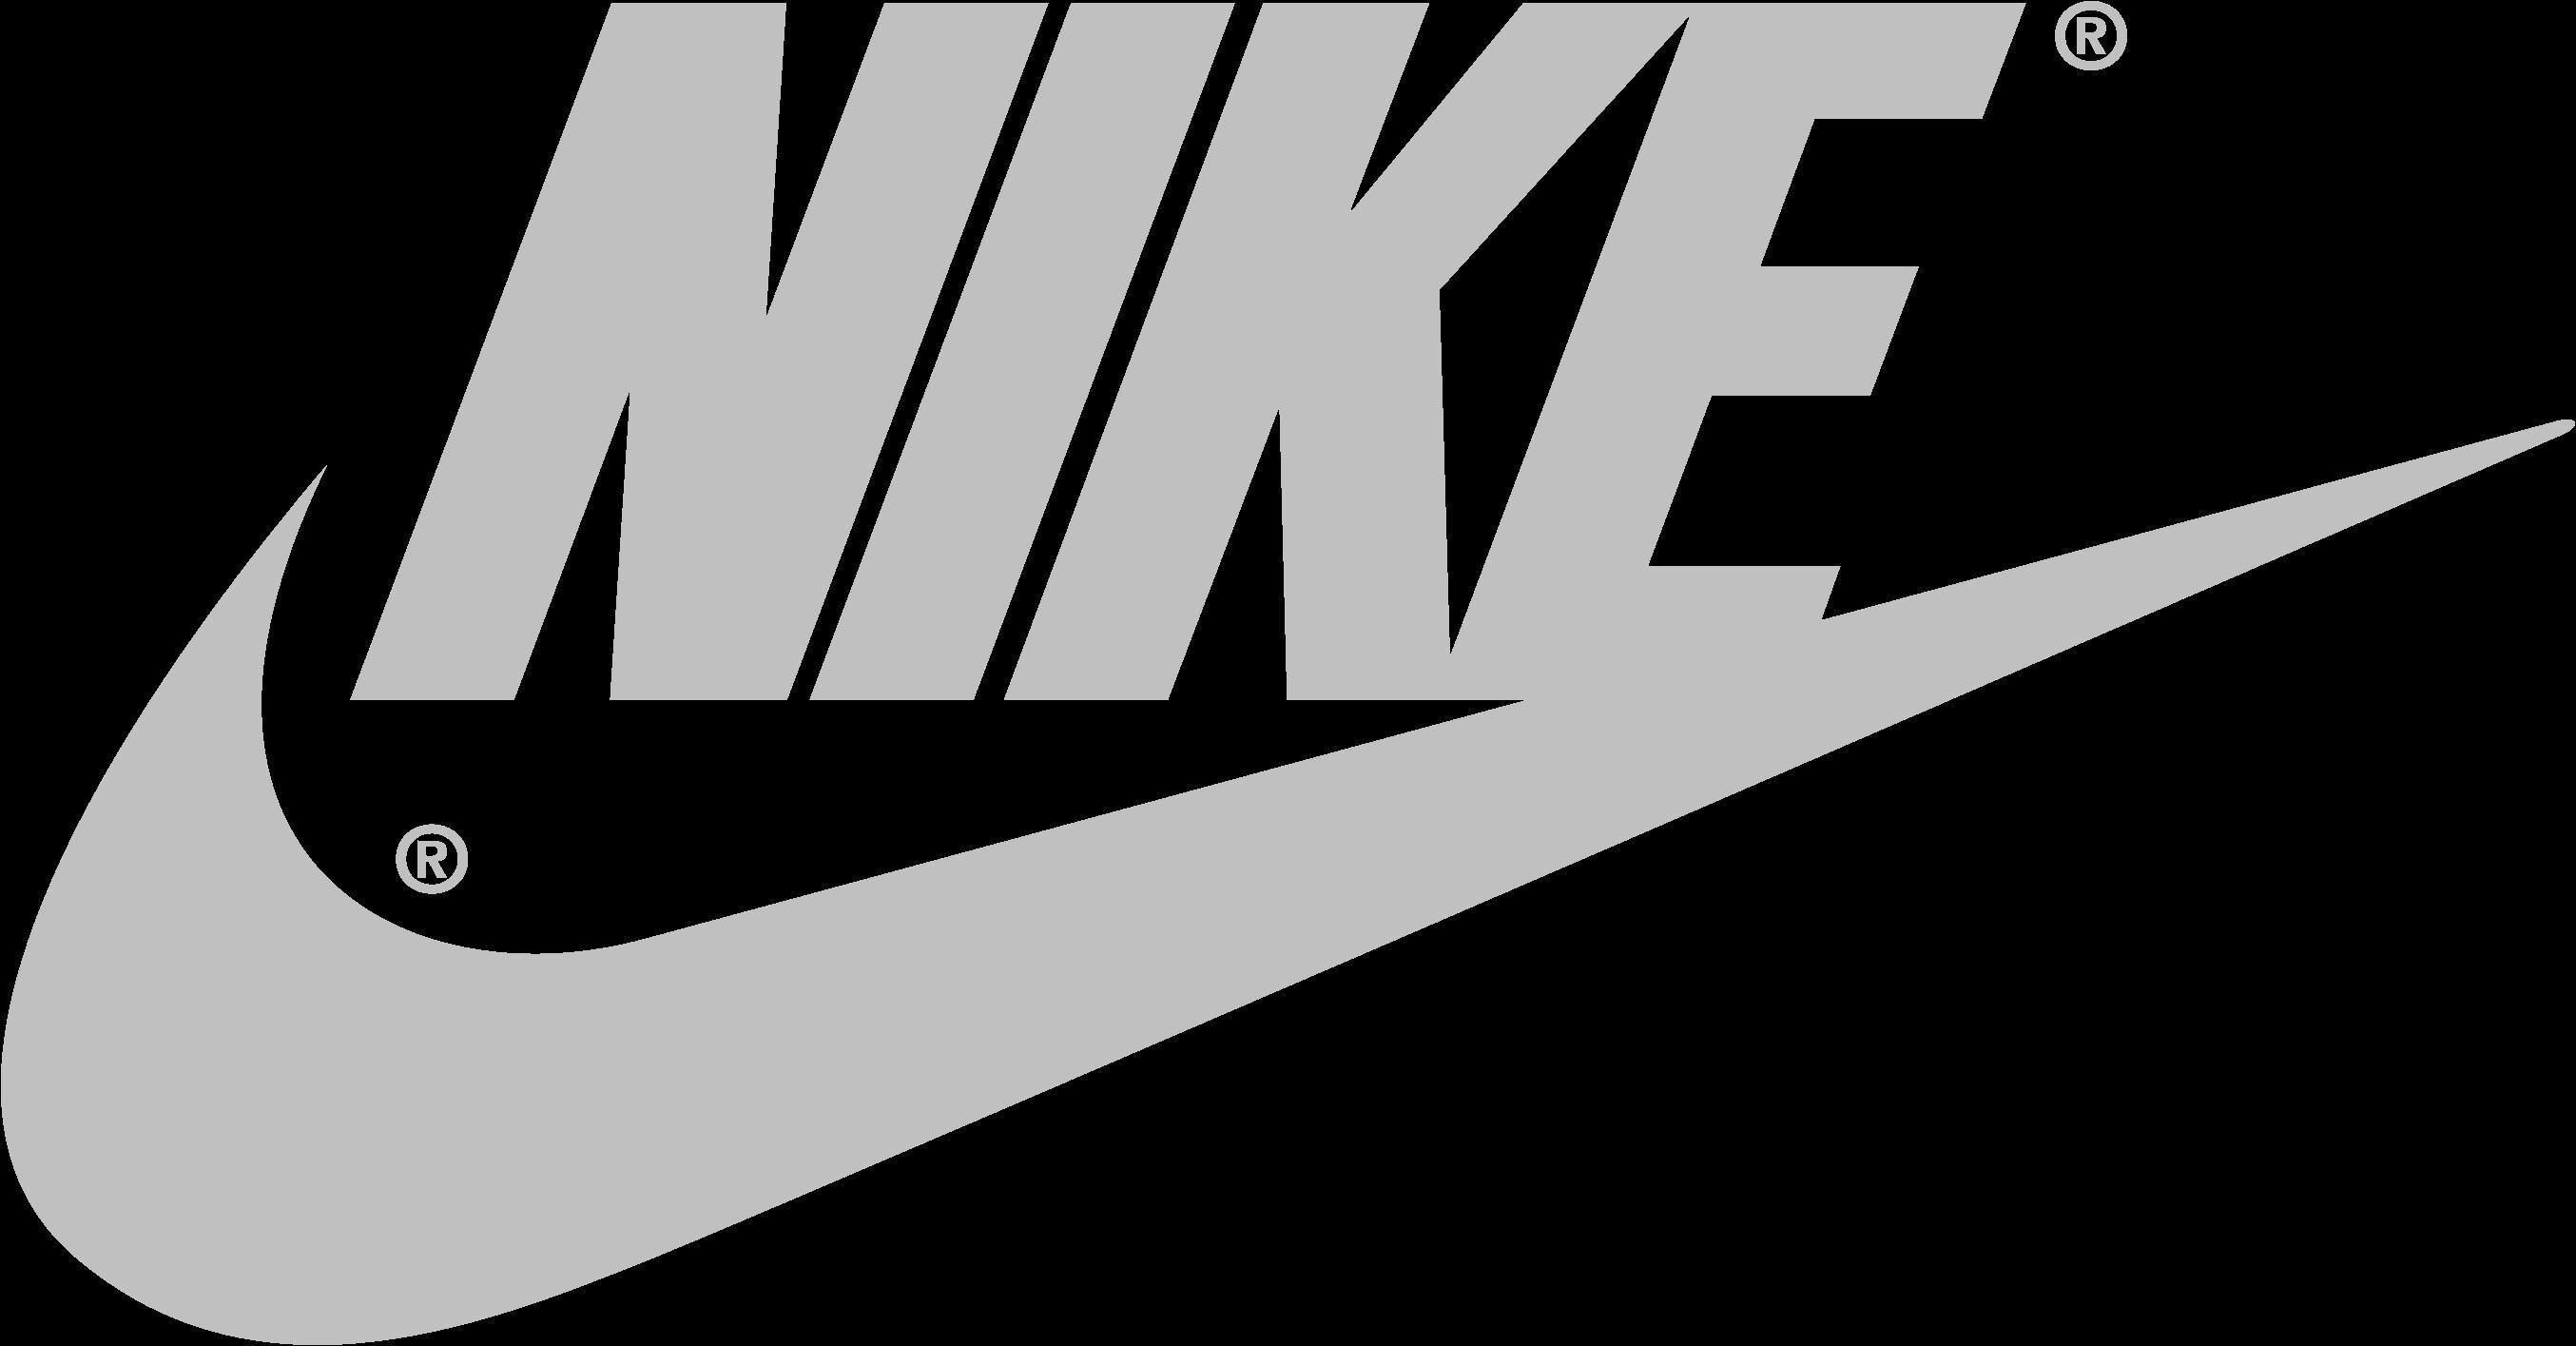 Nike Slogan and Logo - How Powerful is a Slogan? Ask Nike... - Promotion Commotion